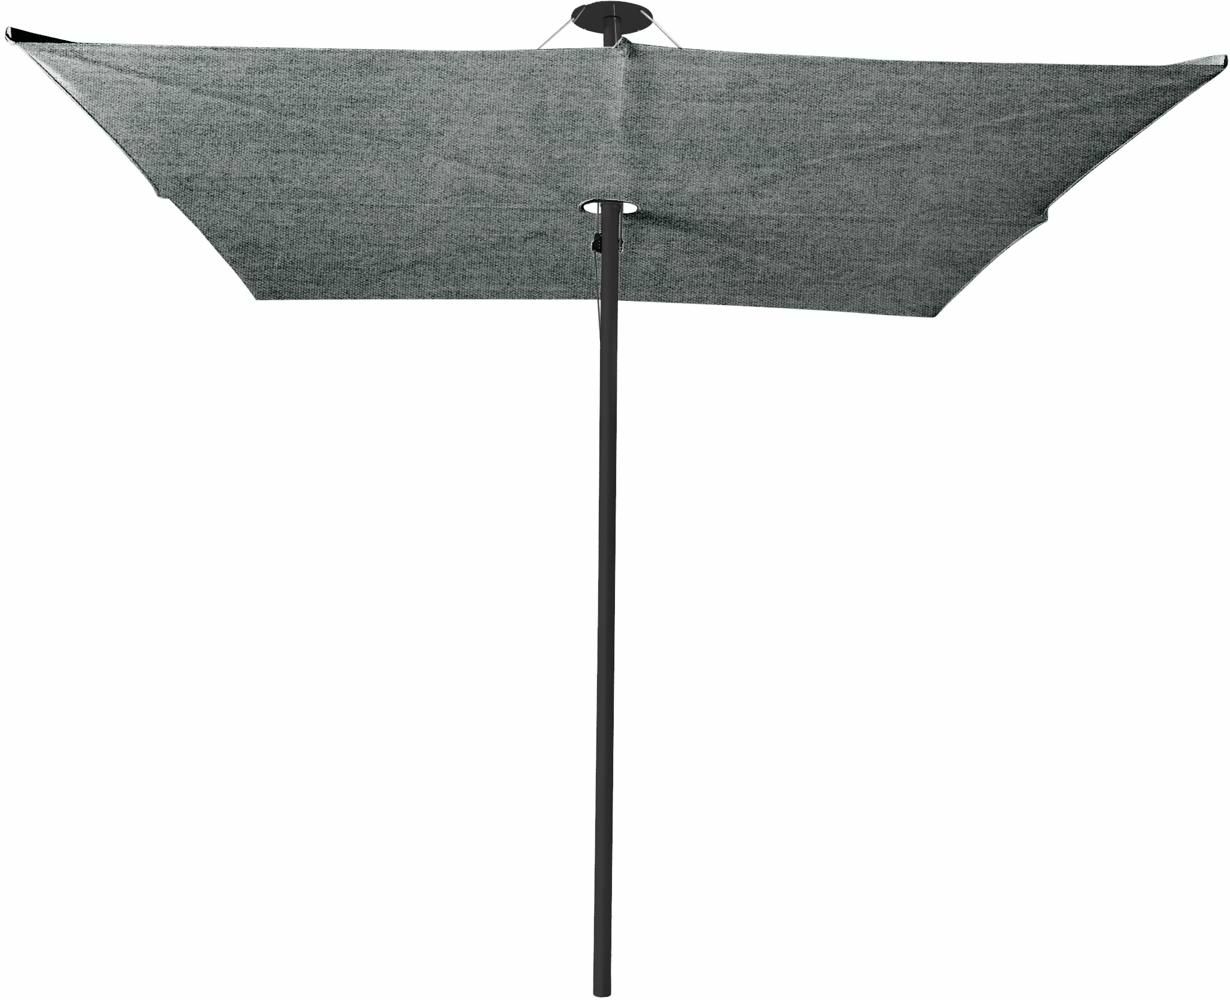 Infina center post umbrella, 3 m square, with frame in Black and Colorum Flanelle canopy.